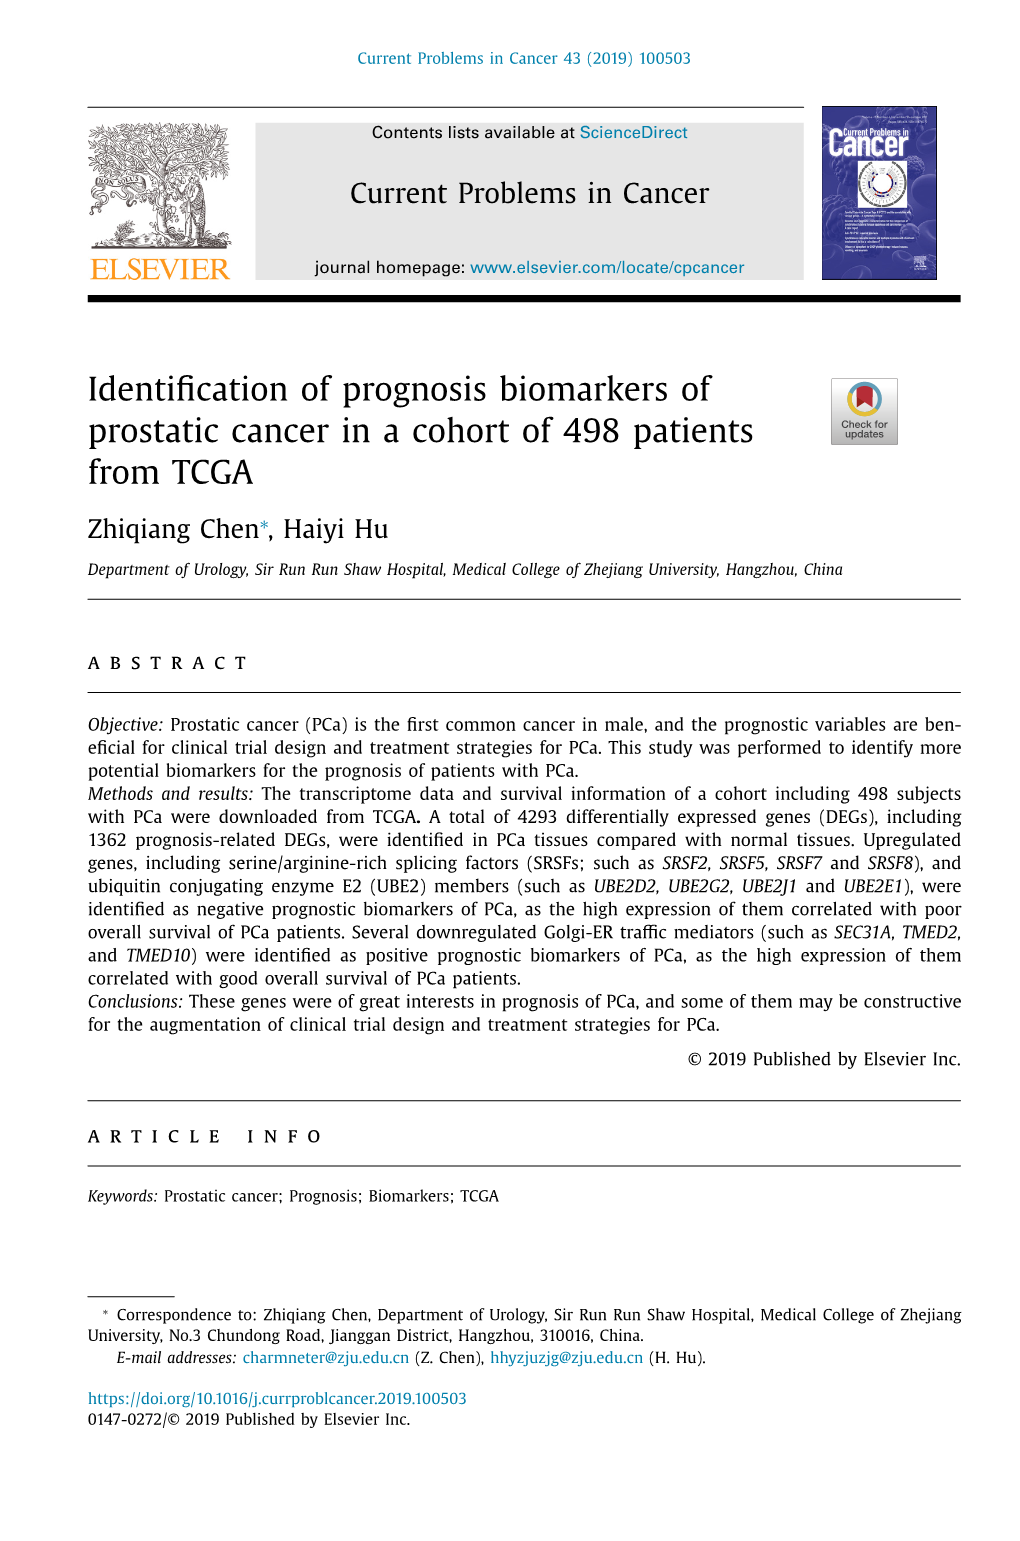 Identification of Prognosis Biomarkers of Prostatic Cancer in a Cohort Of